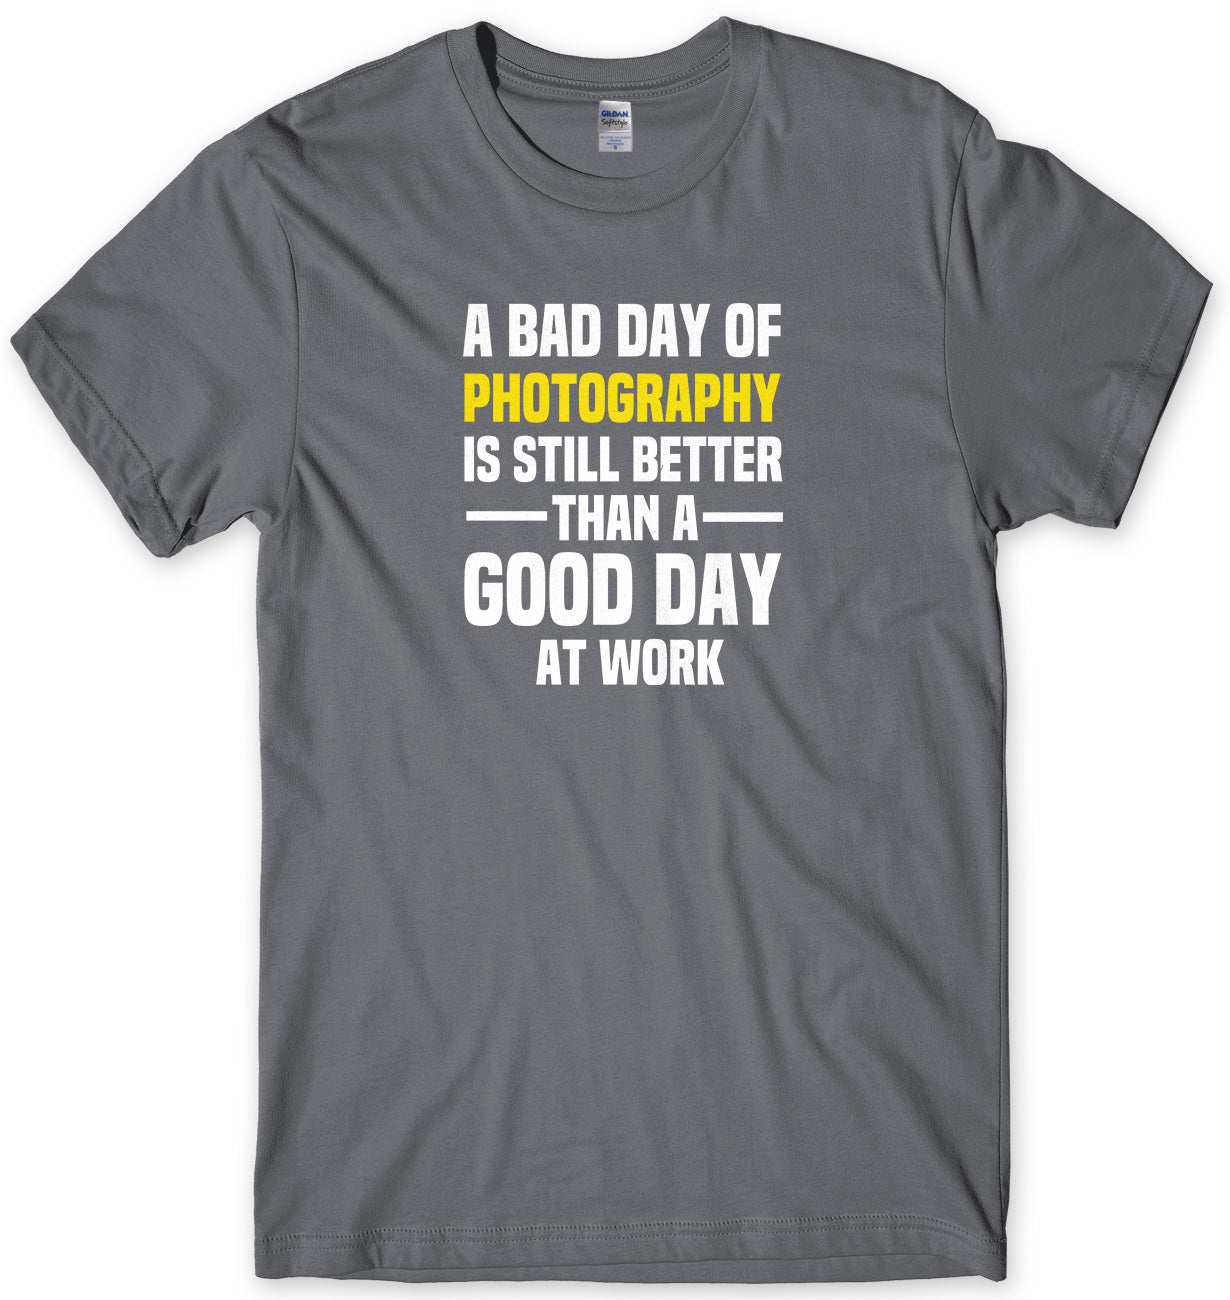 A BAD DAY OF PHOTOGRAPHY IS STILL BETTER THAN A GOOD DAY AT WORK MENS FUNNY SLOGAN UNISEX T-SHIRT - StreetSide Surgeons